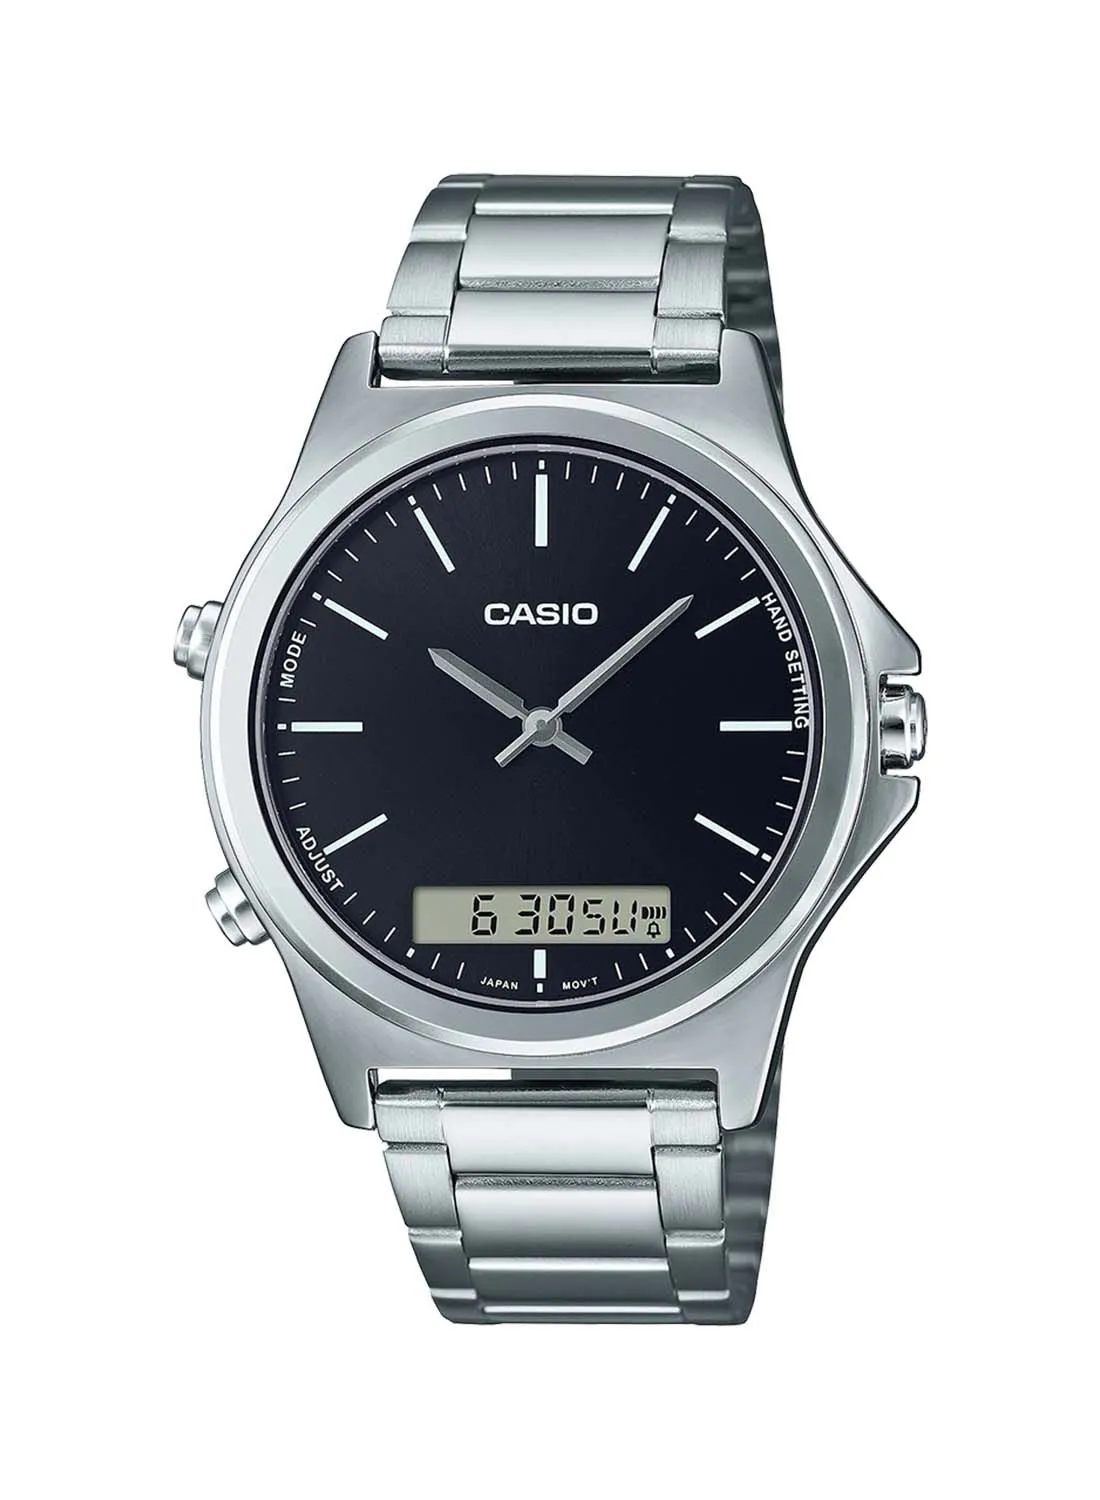 CASIO Analog Plus Digital Round Waterproof Wrist Watch With Stainless Steel MTP-VC01D-1EUDF